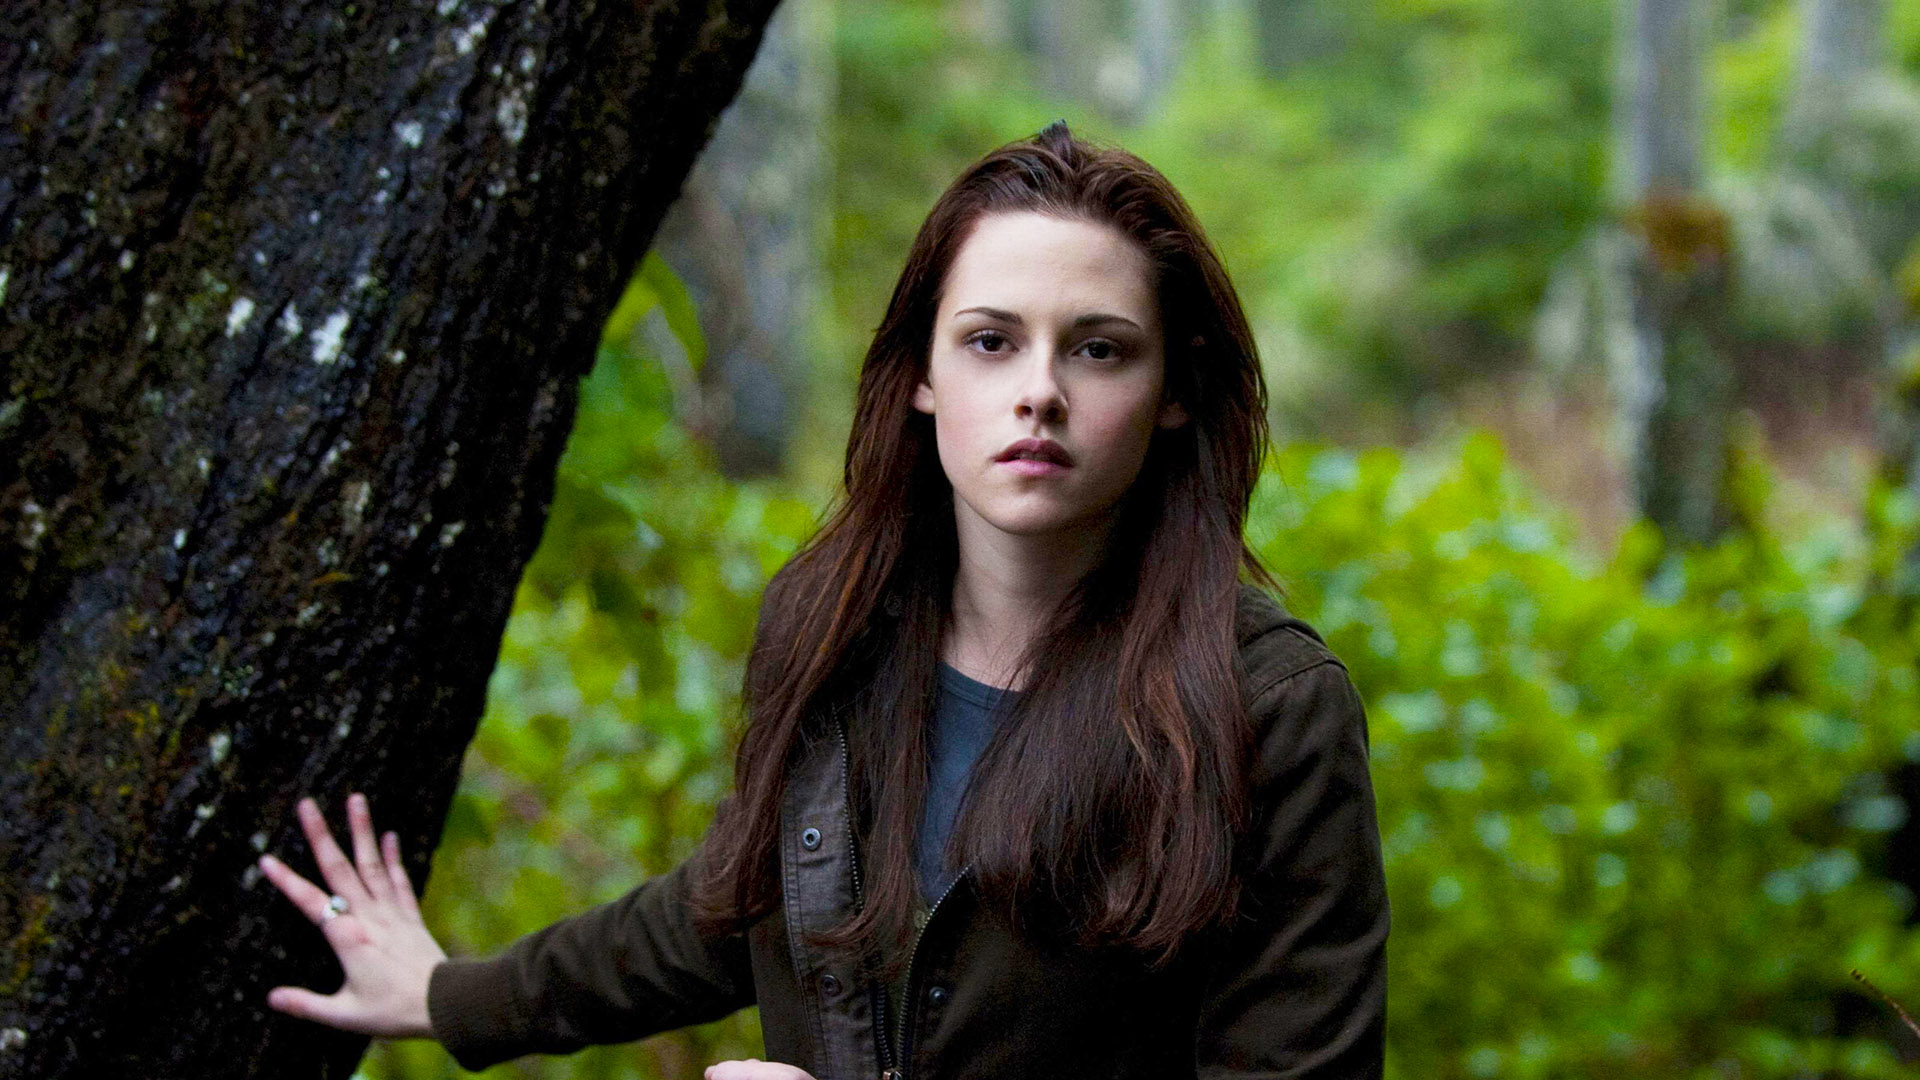 6 Times Twilight Crossed the Line and Made Us Cringe